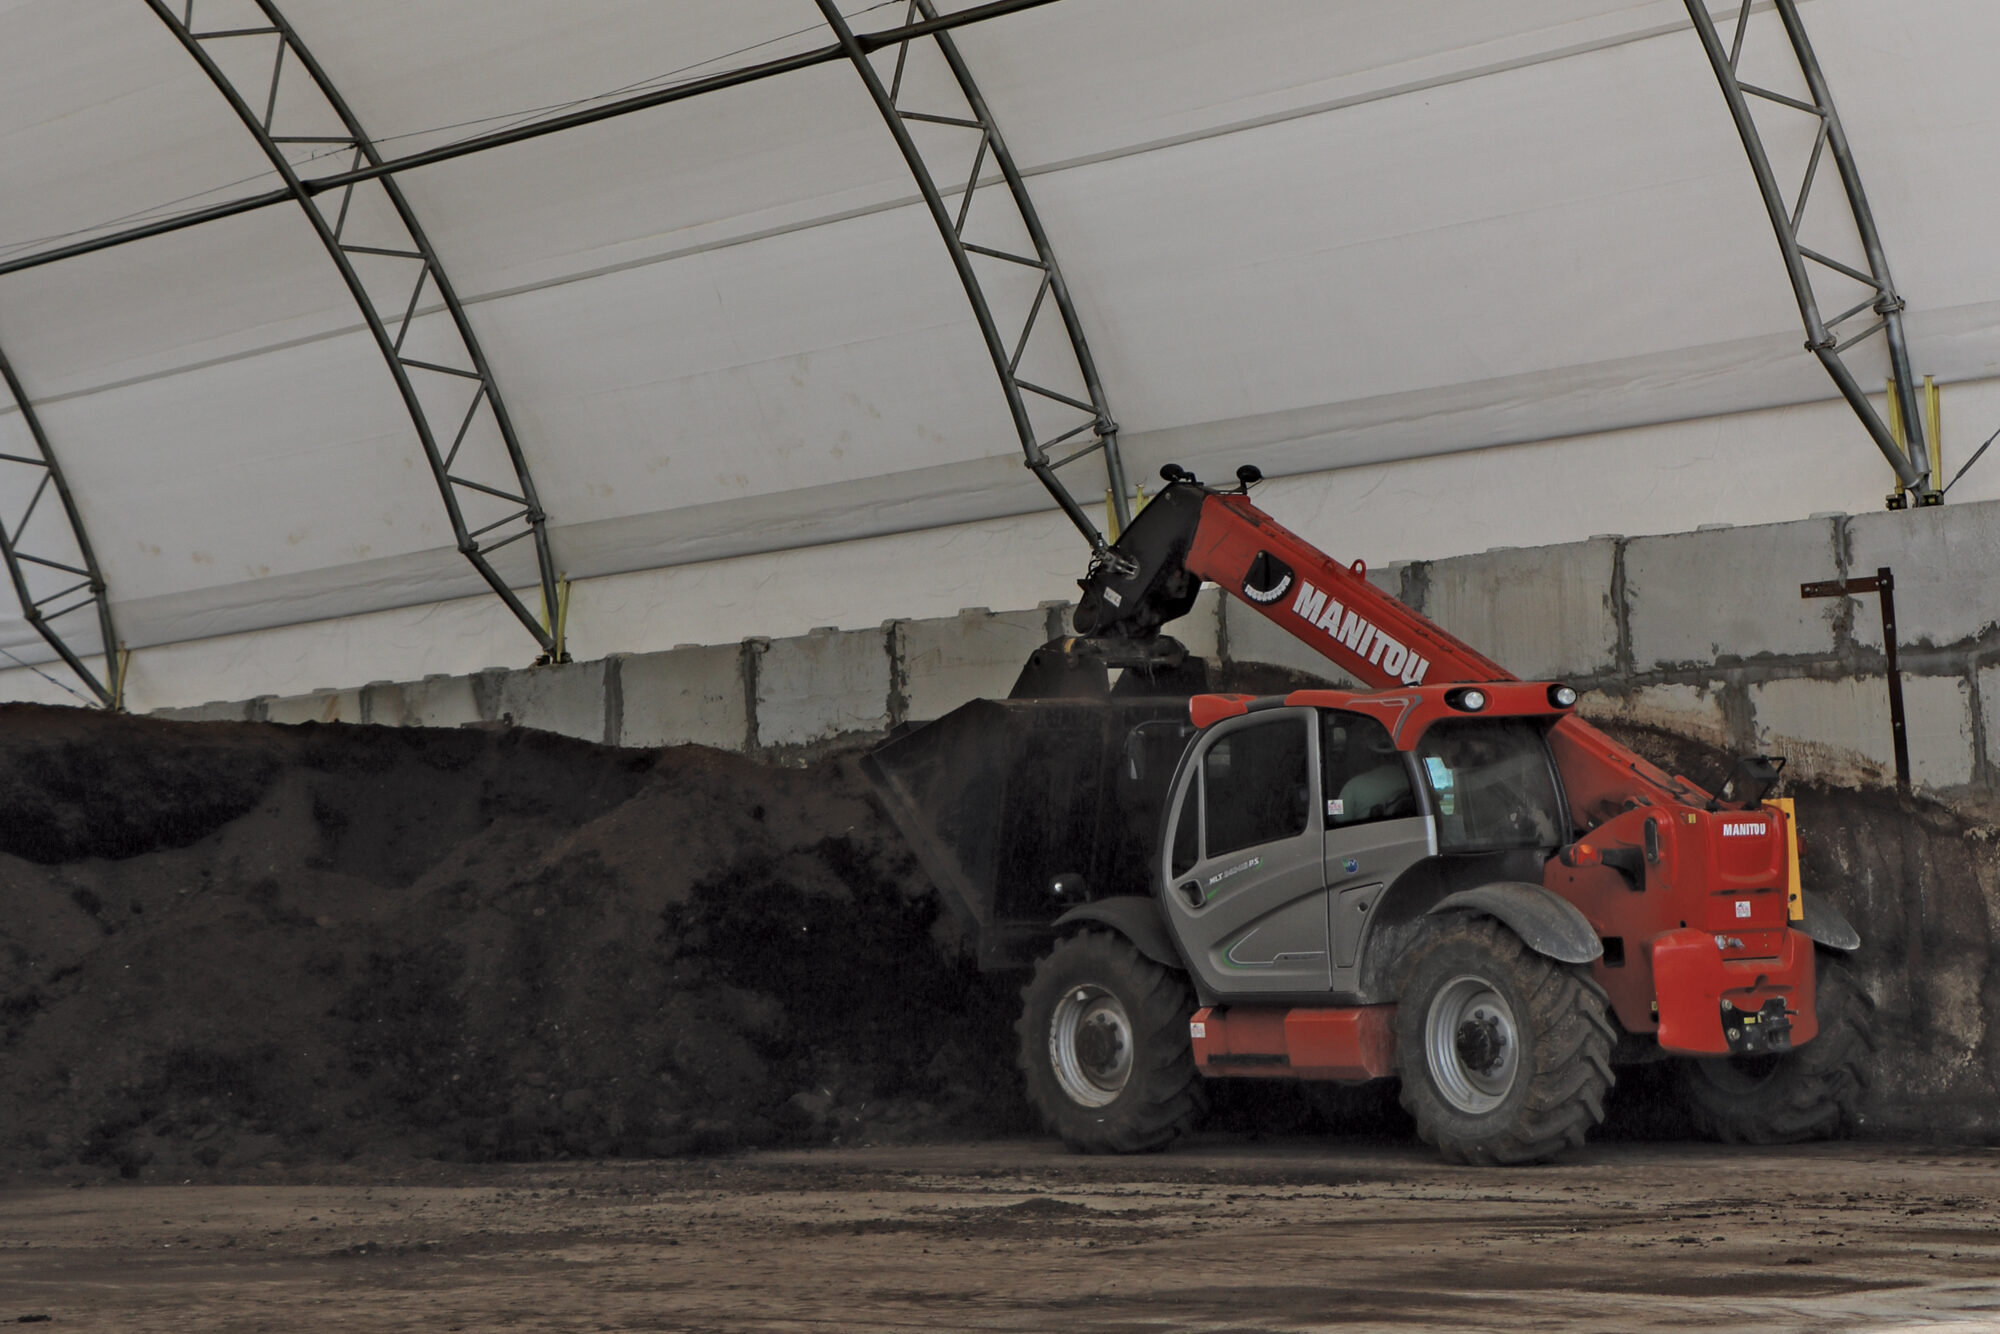 vehicle scooping compost material inside fabric structure